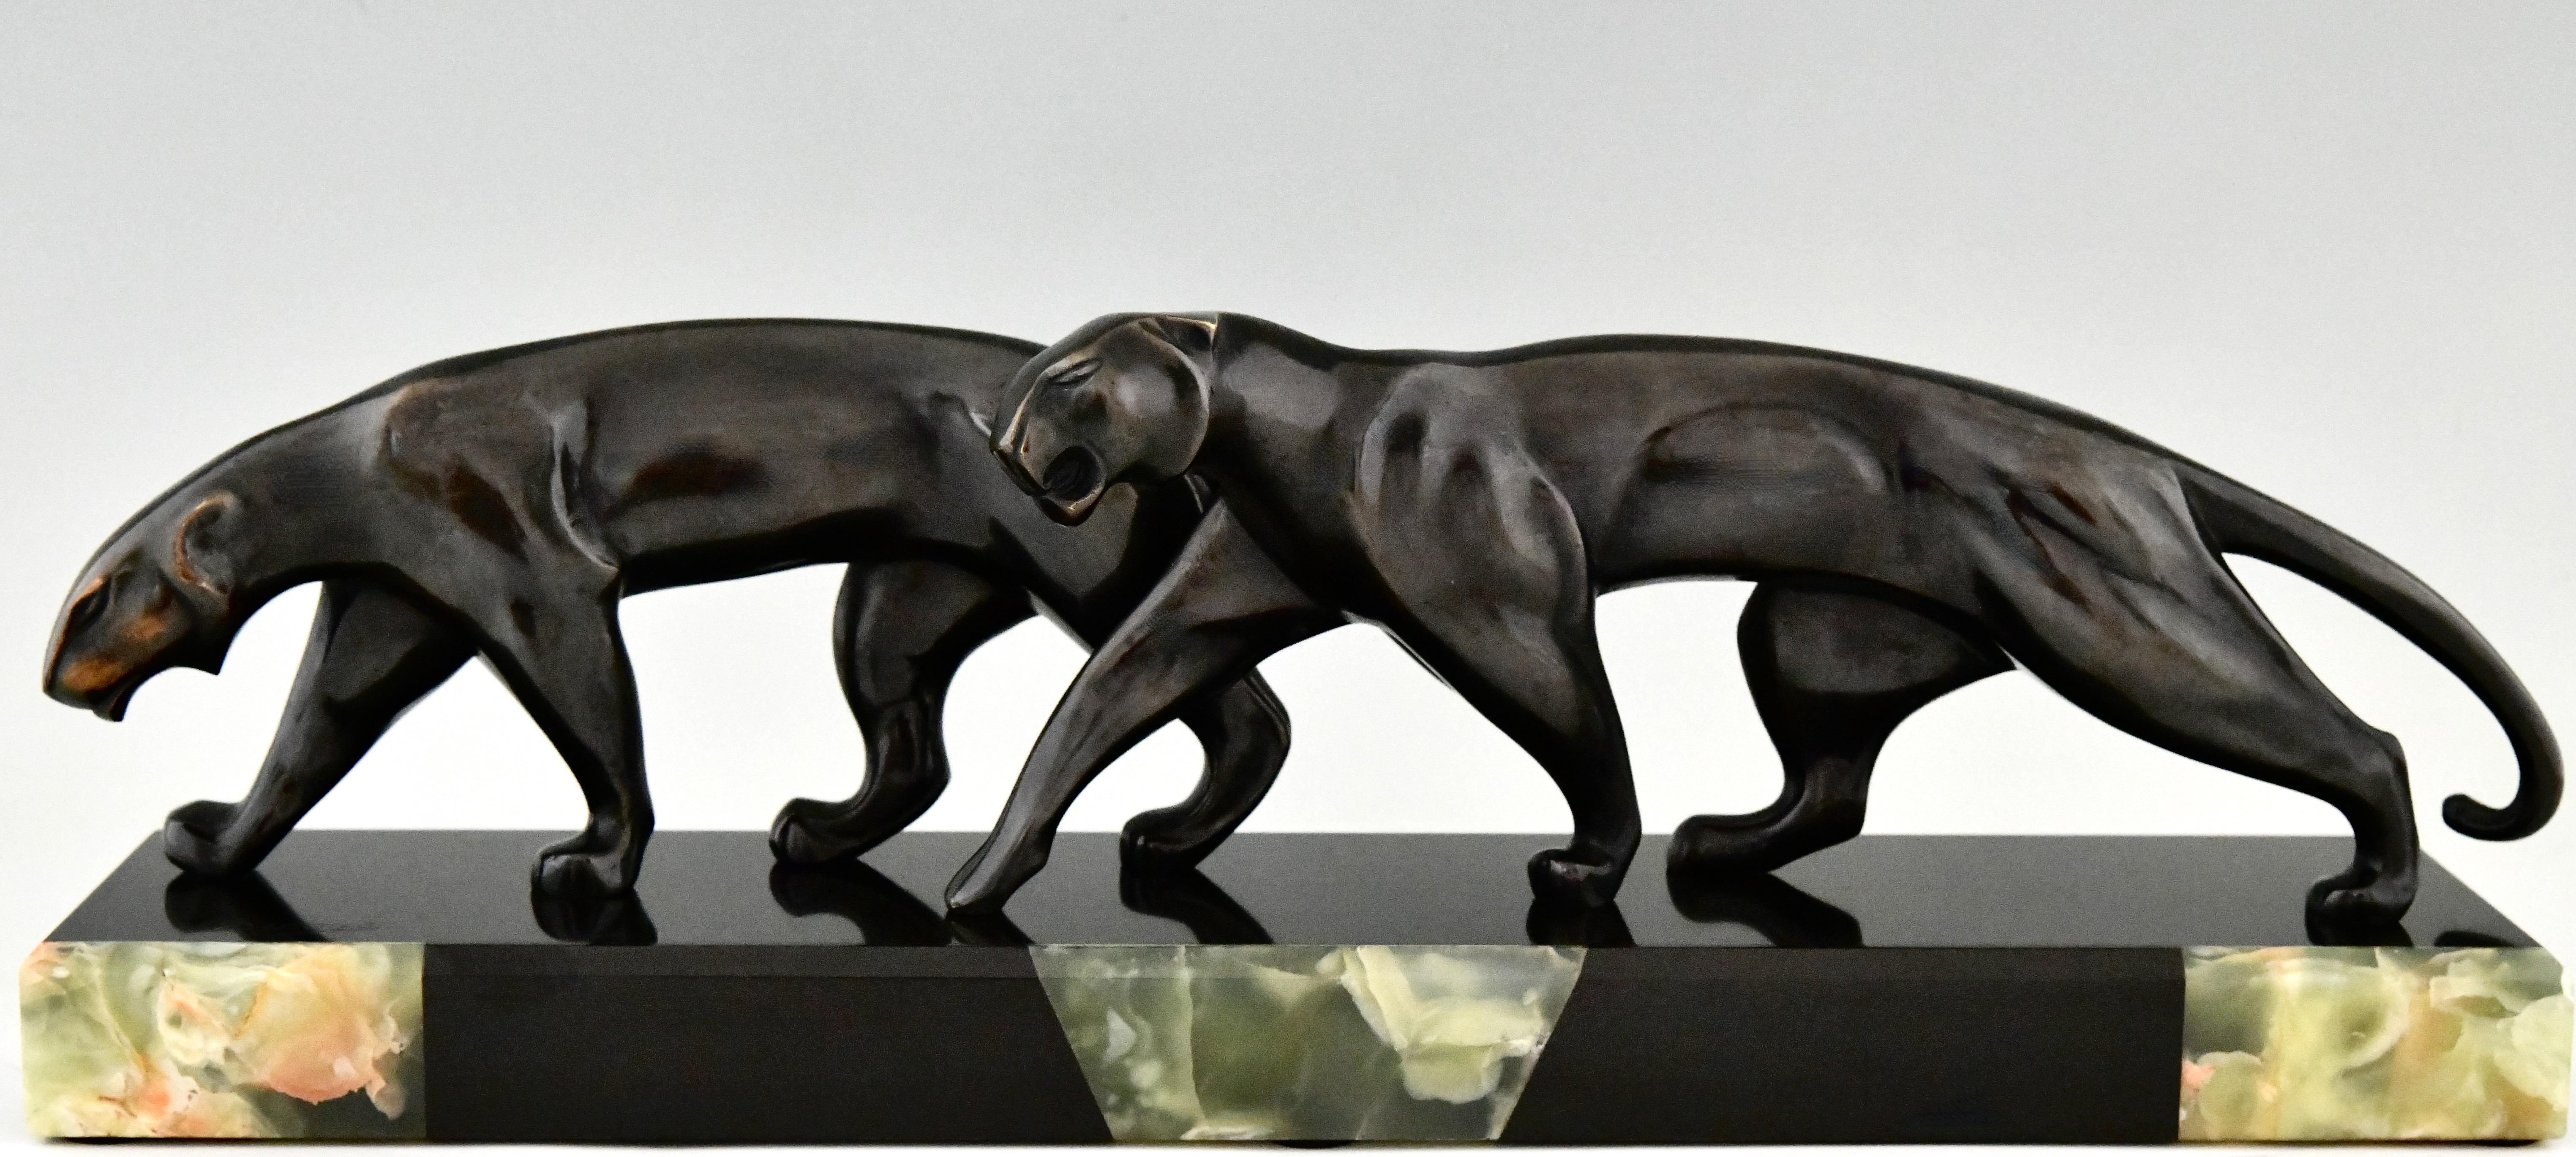 Art Deco bronze sculpture two panthers signed by Michel Decoux.
Bronze, black patina on a Black marble base with green onyx inlay. 
France 1920. 
This model is illustrated on page 294 of the book
Dictionnaire illustré des sculpteurs animaliers &